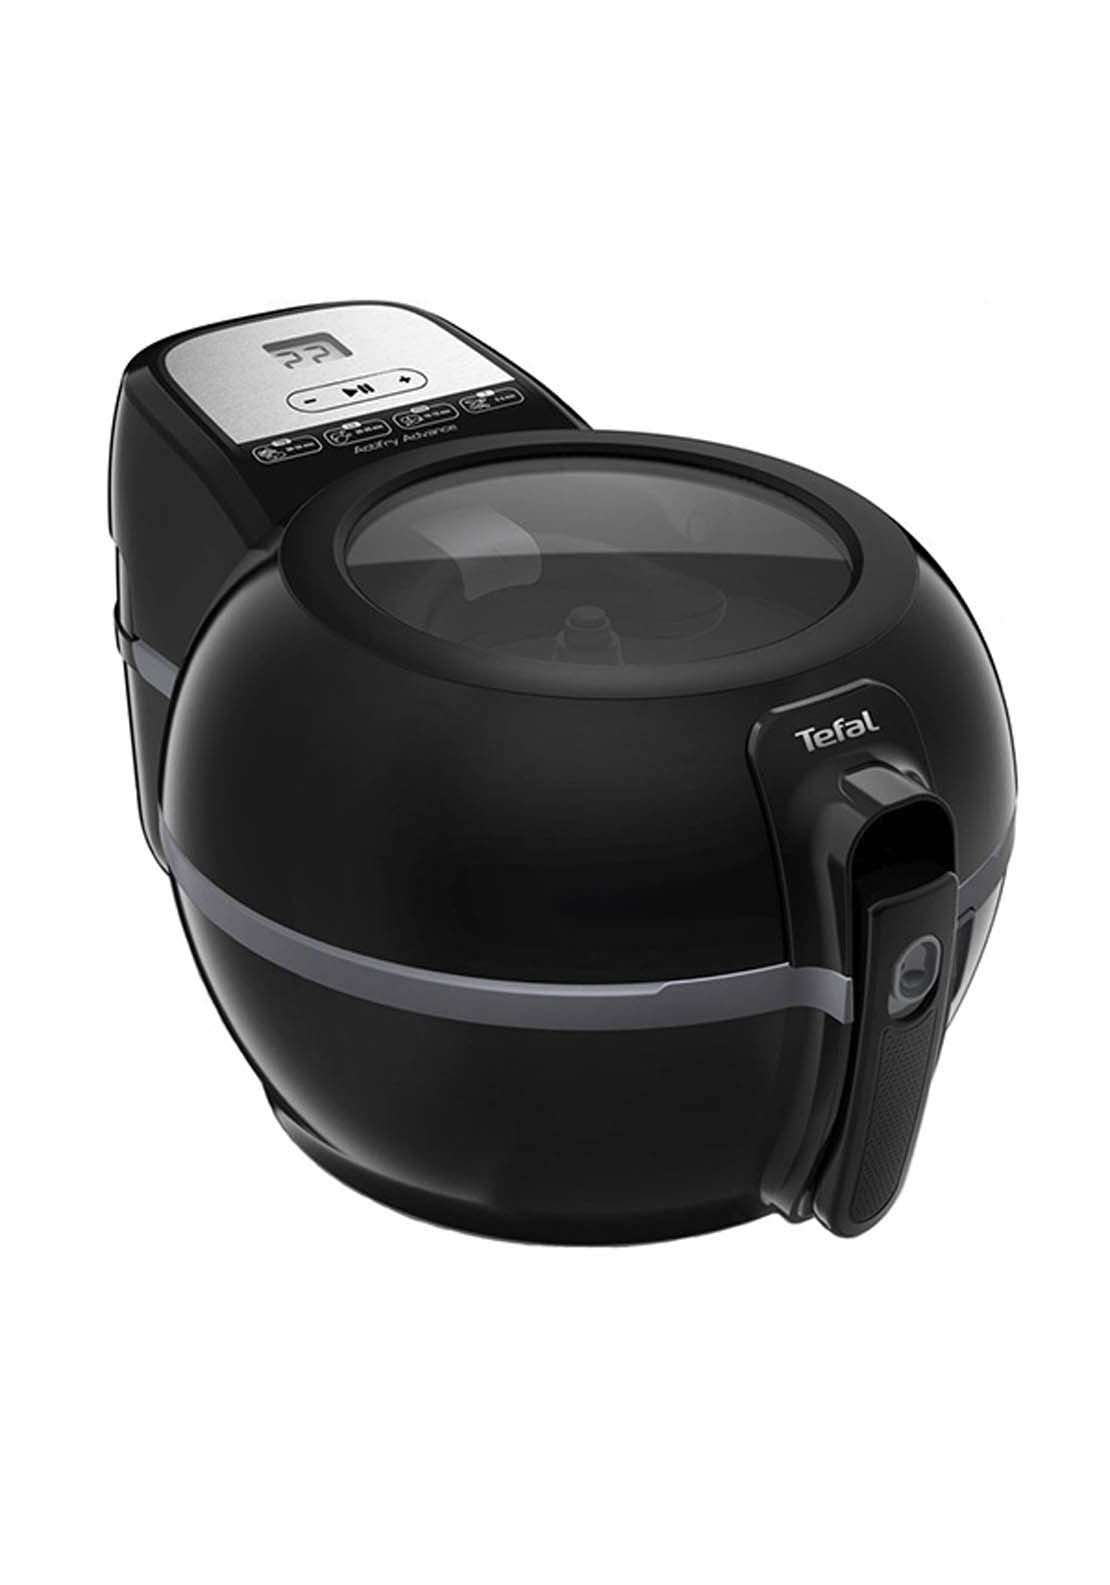 Tefal Tefal Advanced Actifry 1.2 2 Shaws Department Stores